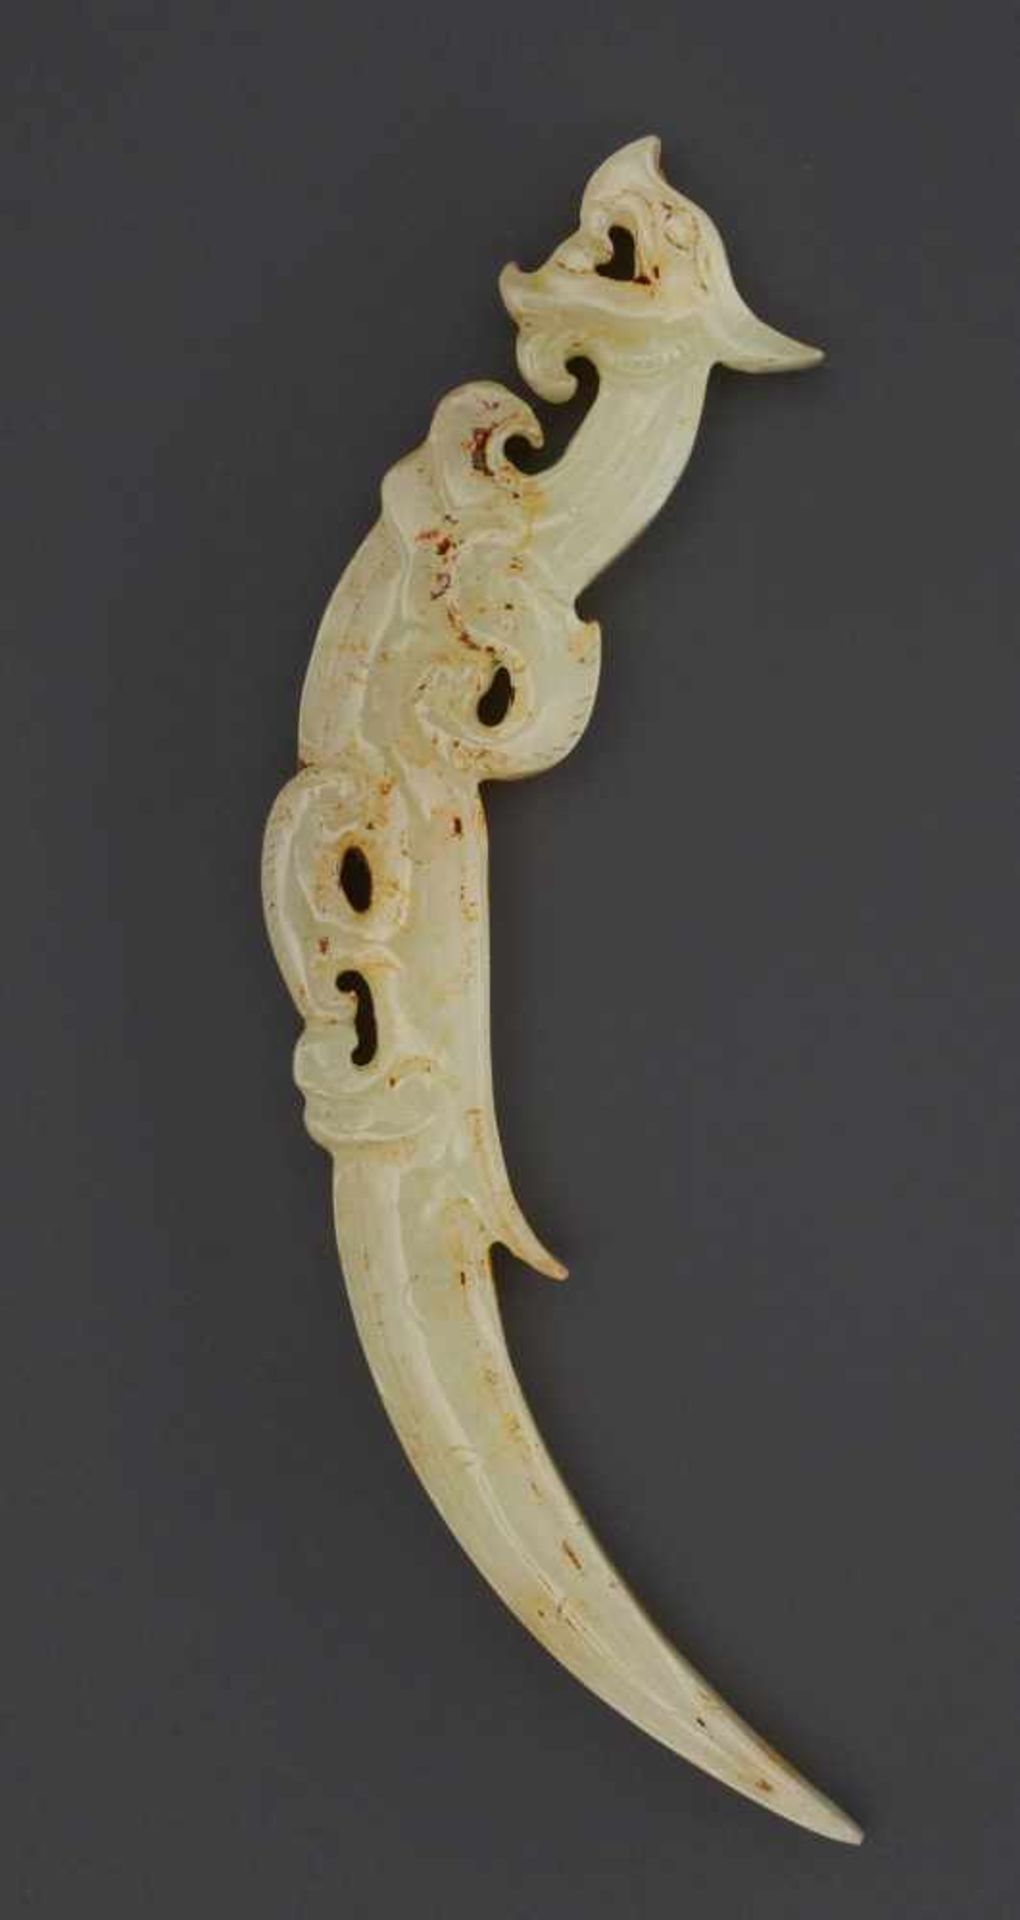 DRAGON-SHAPED XI OR “KNOT-OPENER” This jade is published in Filippo Salviati 4000 YEARS OF CHINESE